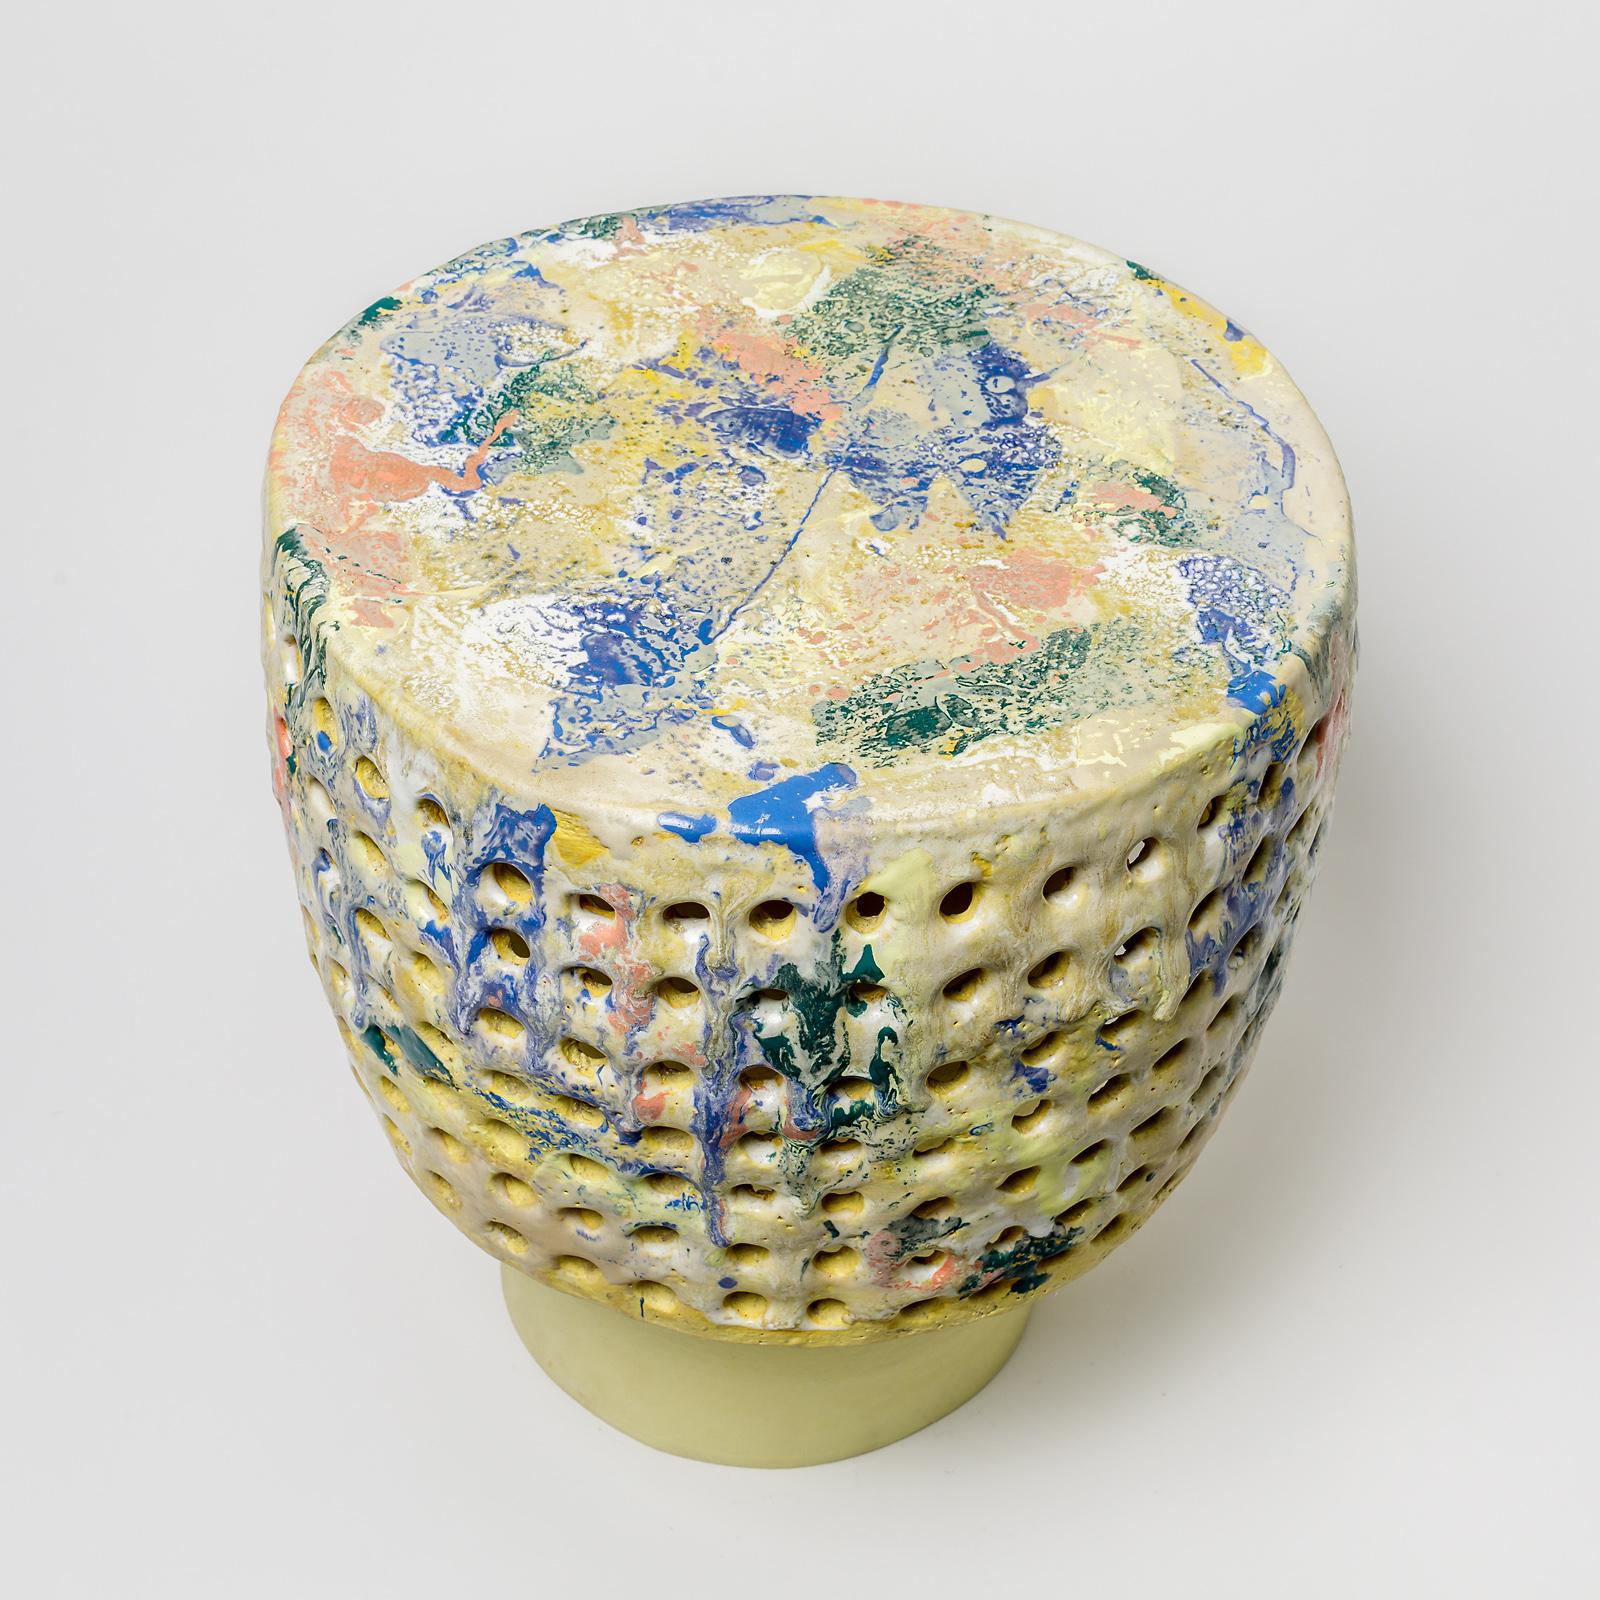 Contemporary Ceramic Stool or Table with Glazes Decoration by Mia Jensen, circa 2021